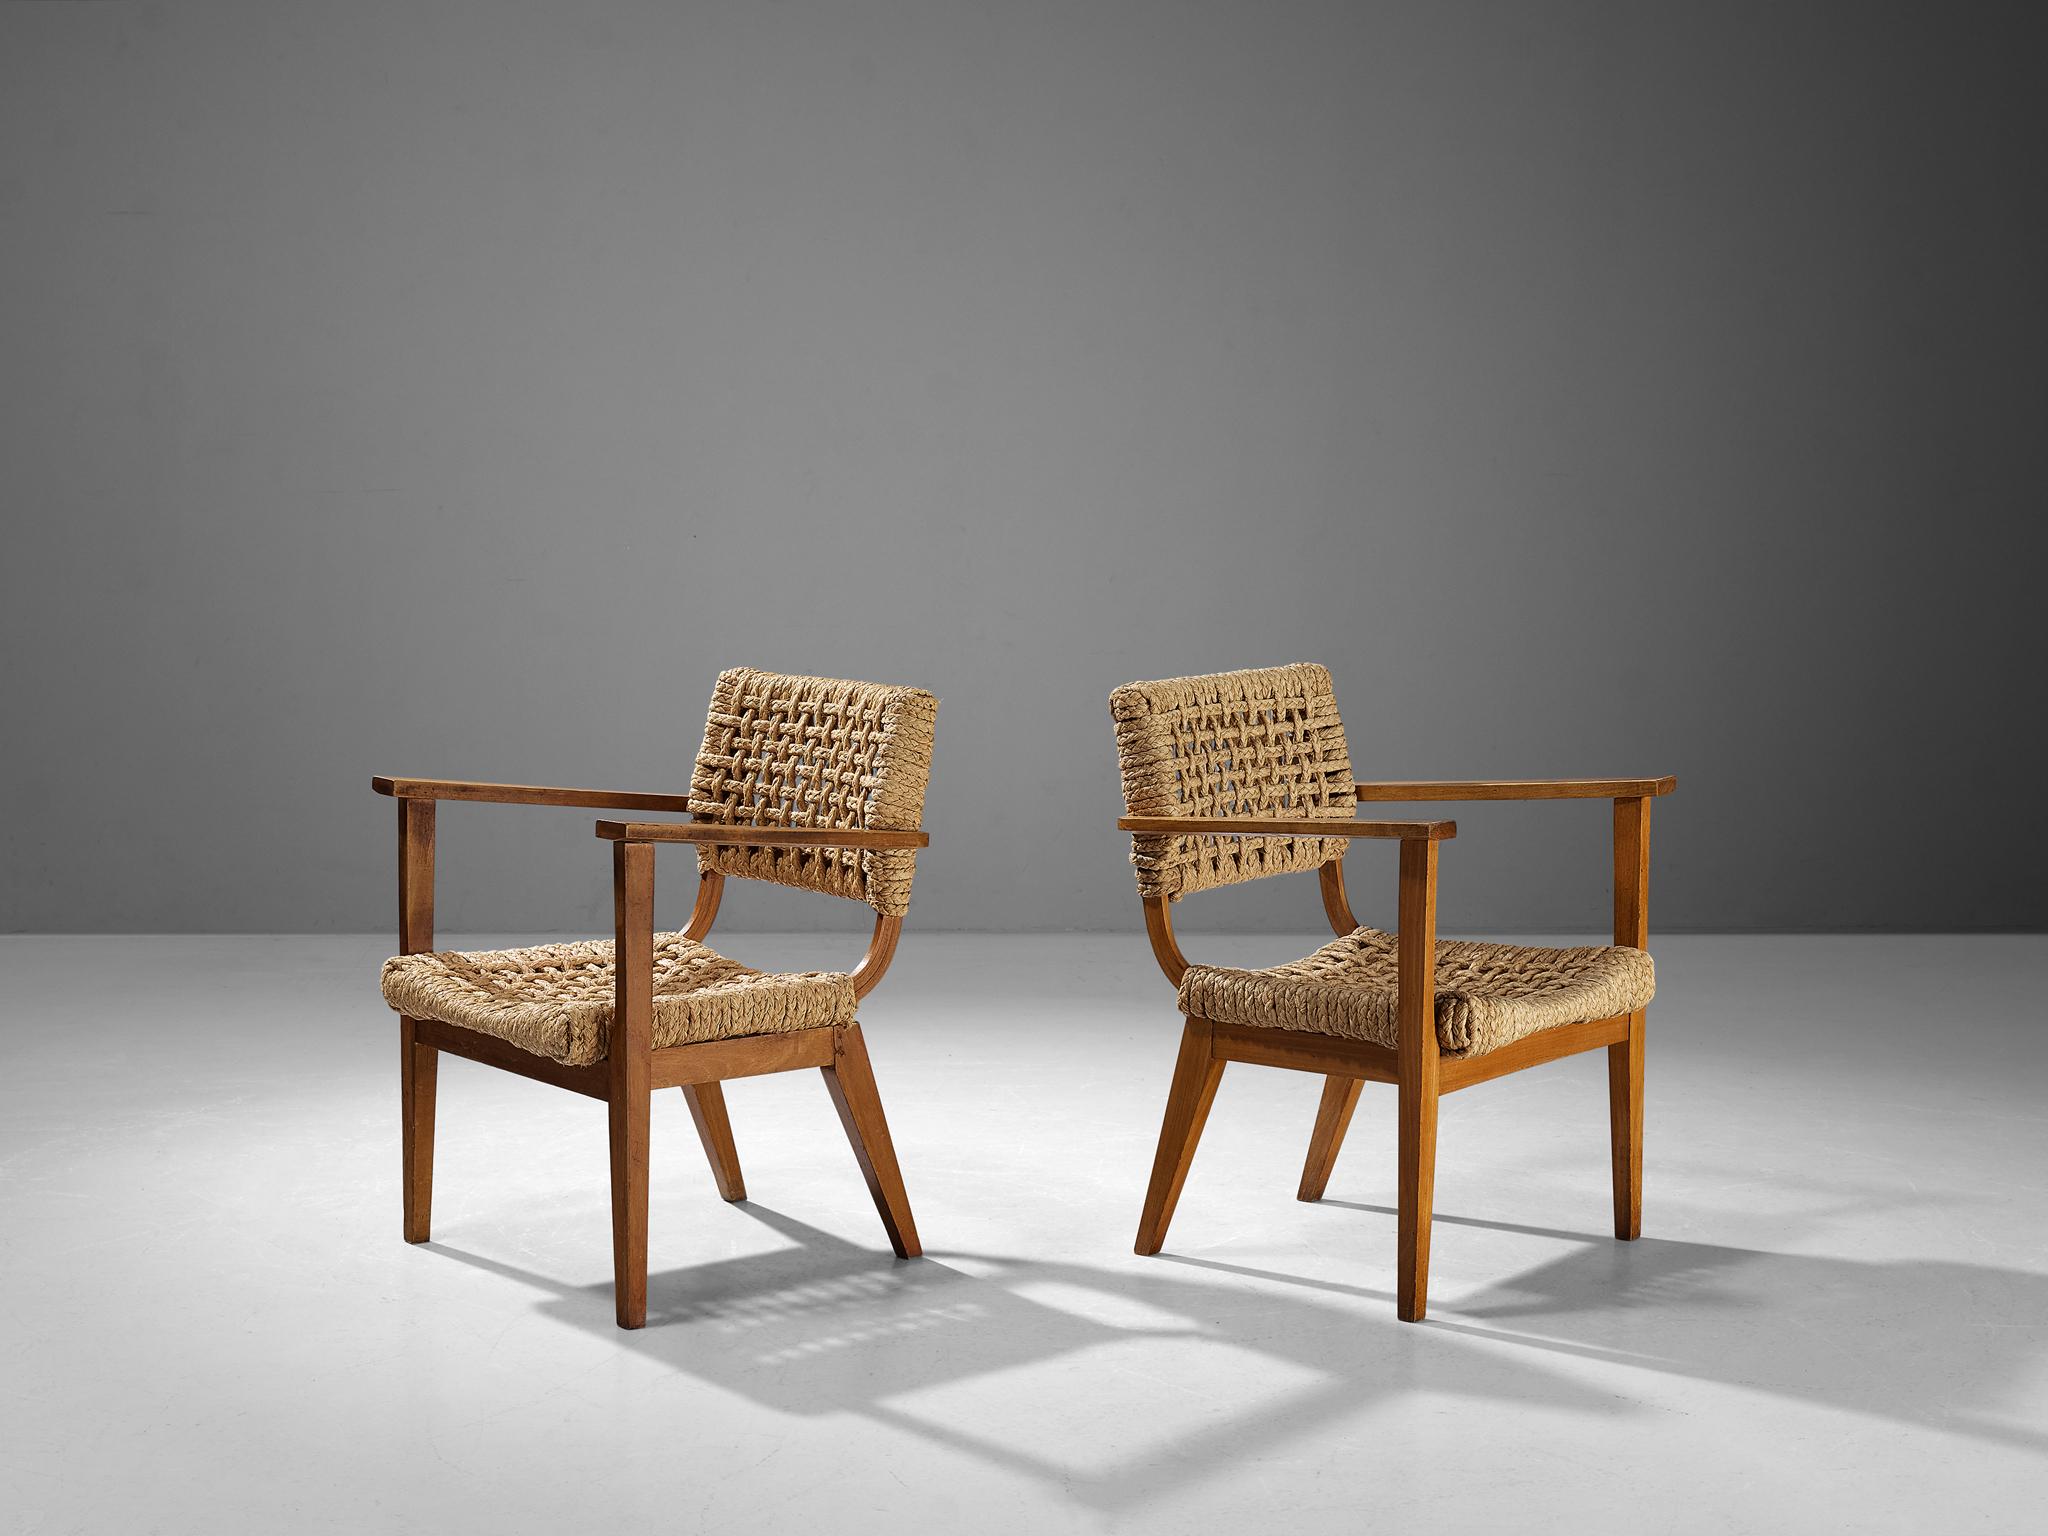 Adrien Audoux & Frida Minet for Vibo Vesoul, pair of armchairs, beech, straw, France, 1950s. 

Pair of armchairs designed by the duo Adrien Audoux and Frida Minet. The seating and backrest are made of woven hemp from the abaca plant which is close